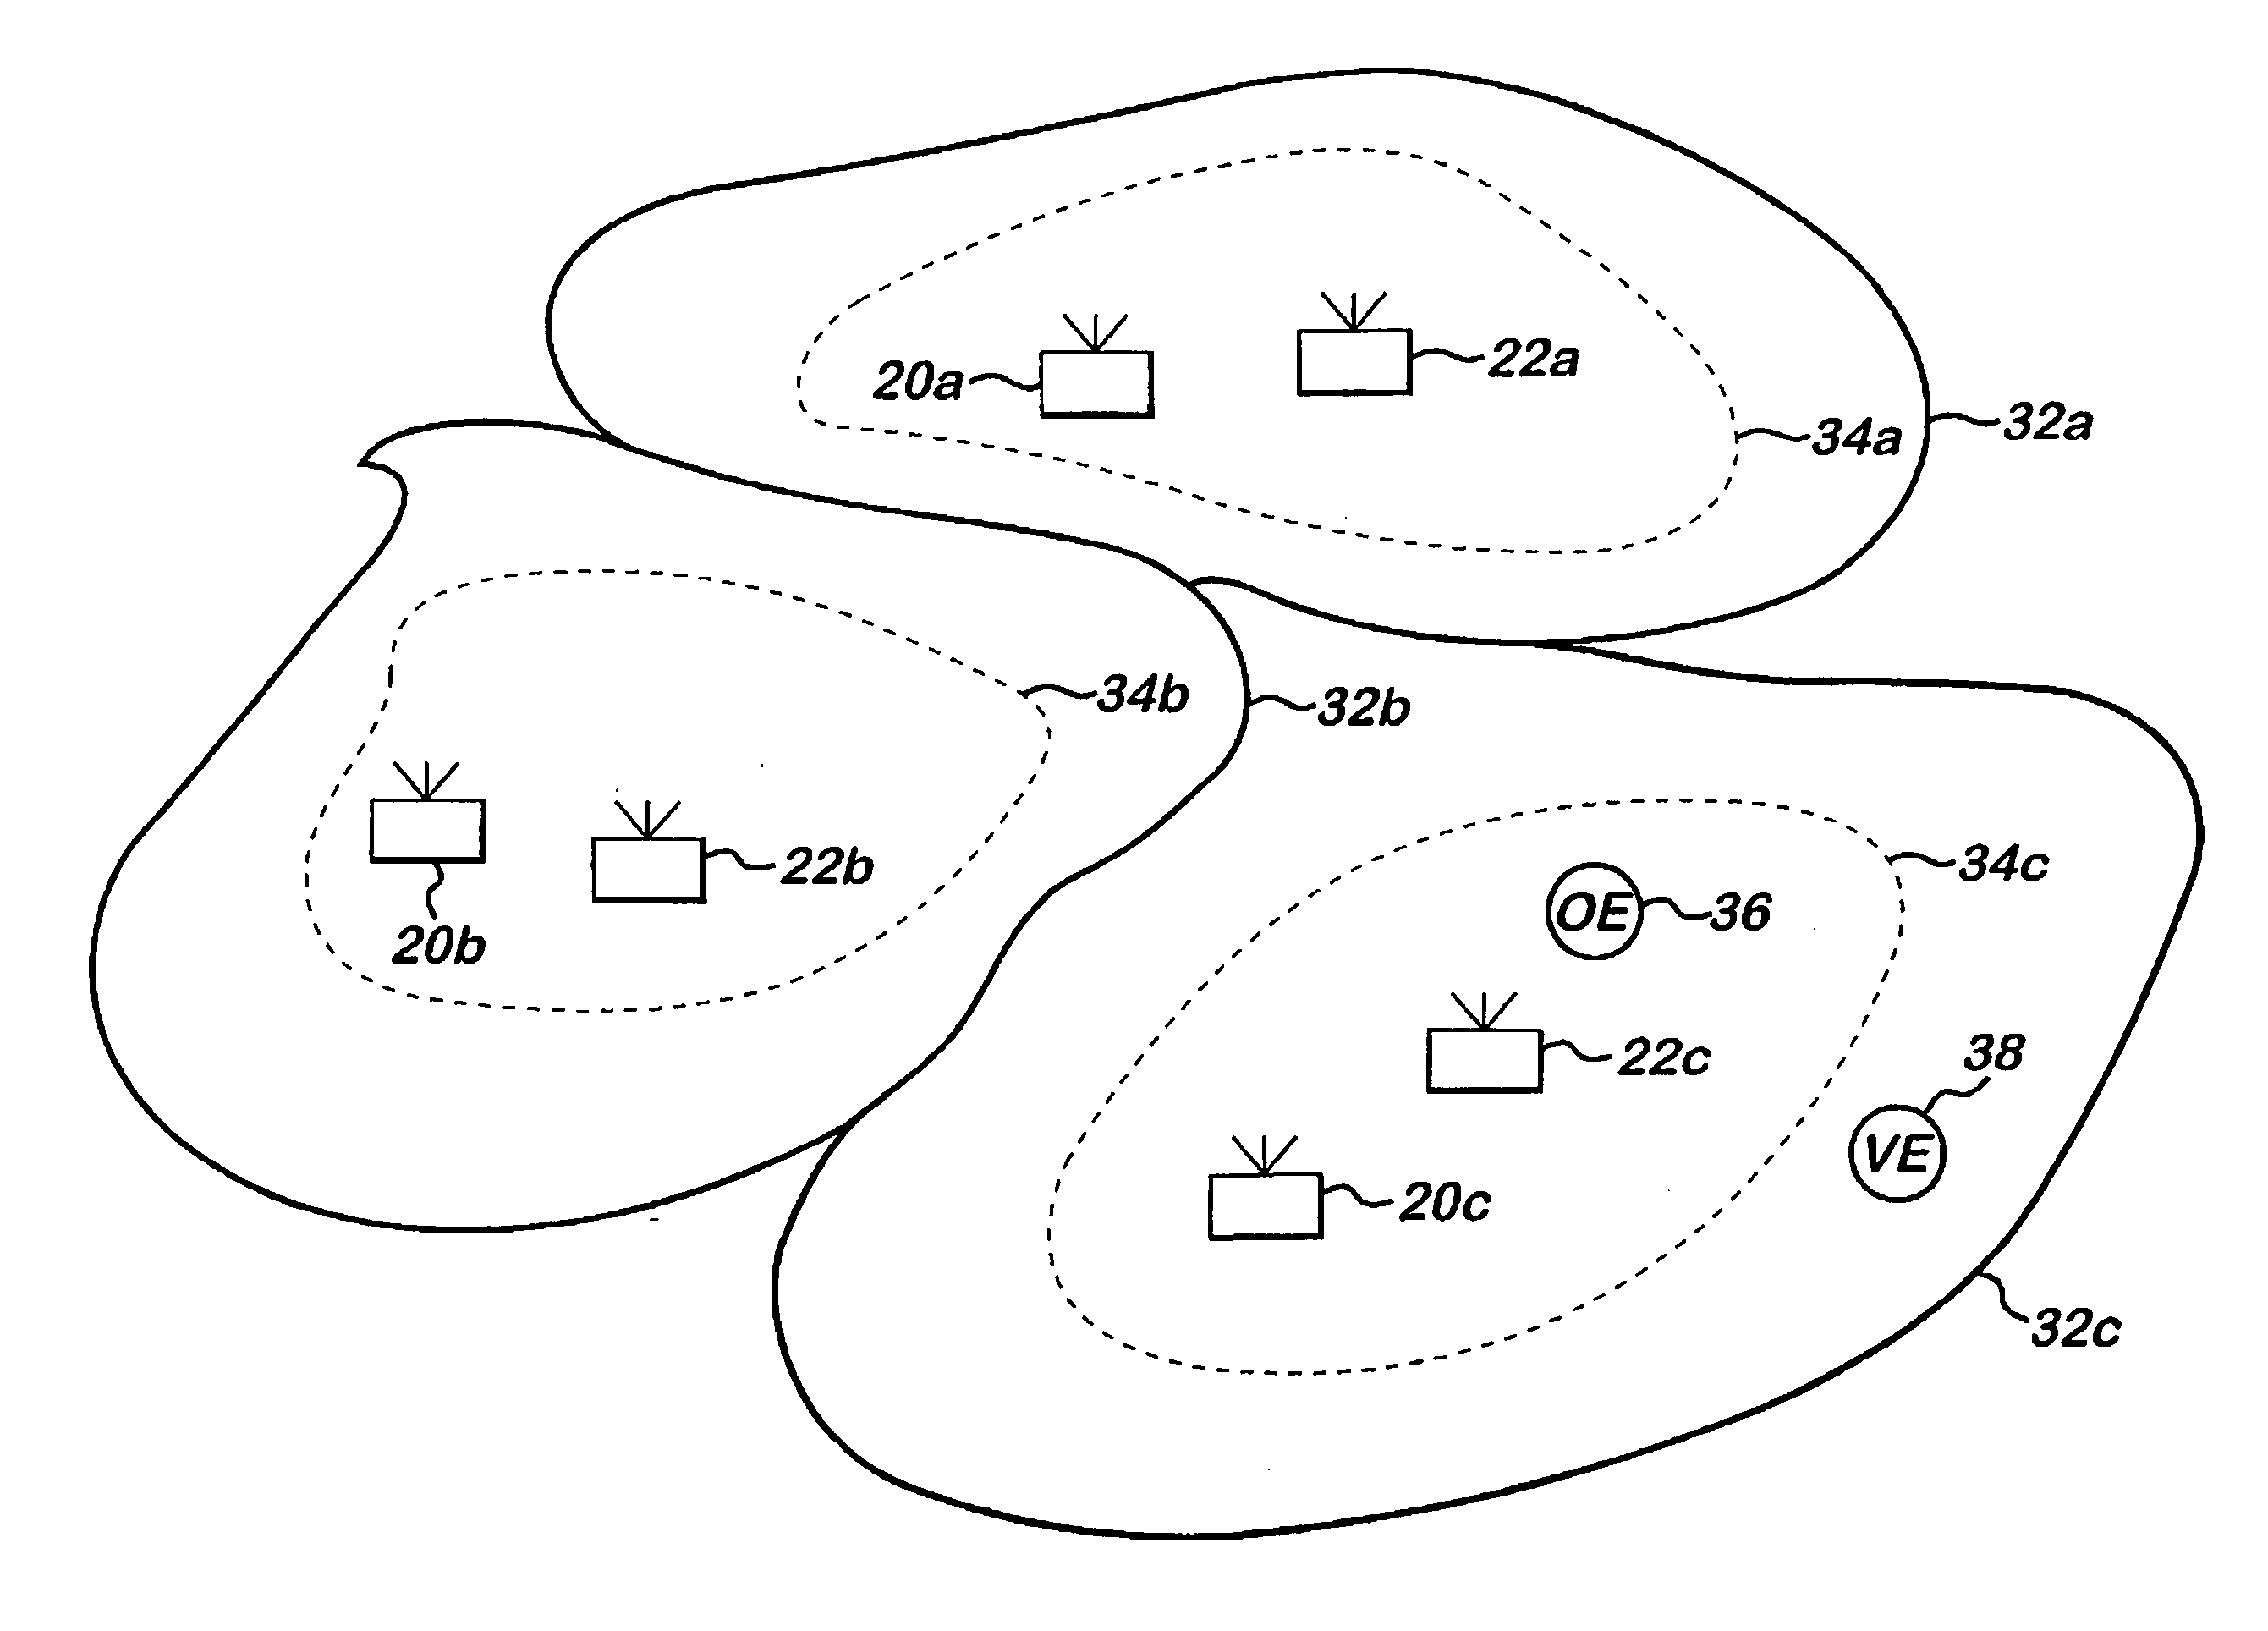 Service priorities in multi-cell network